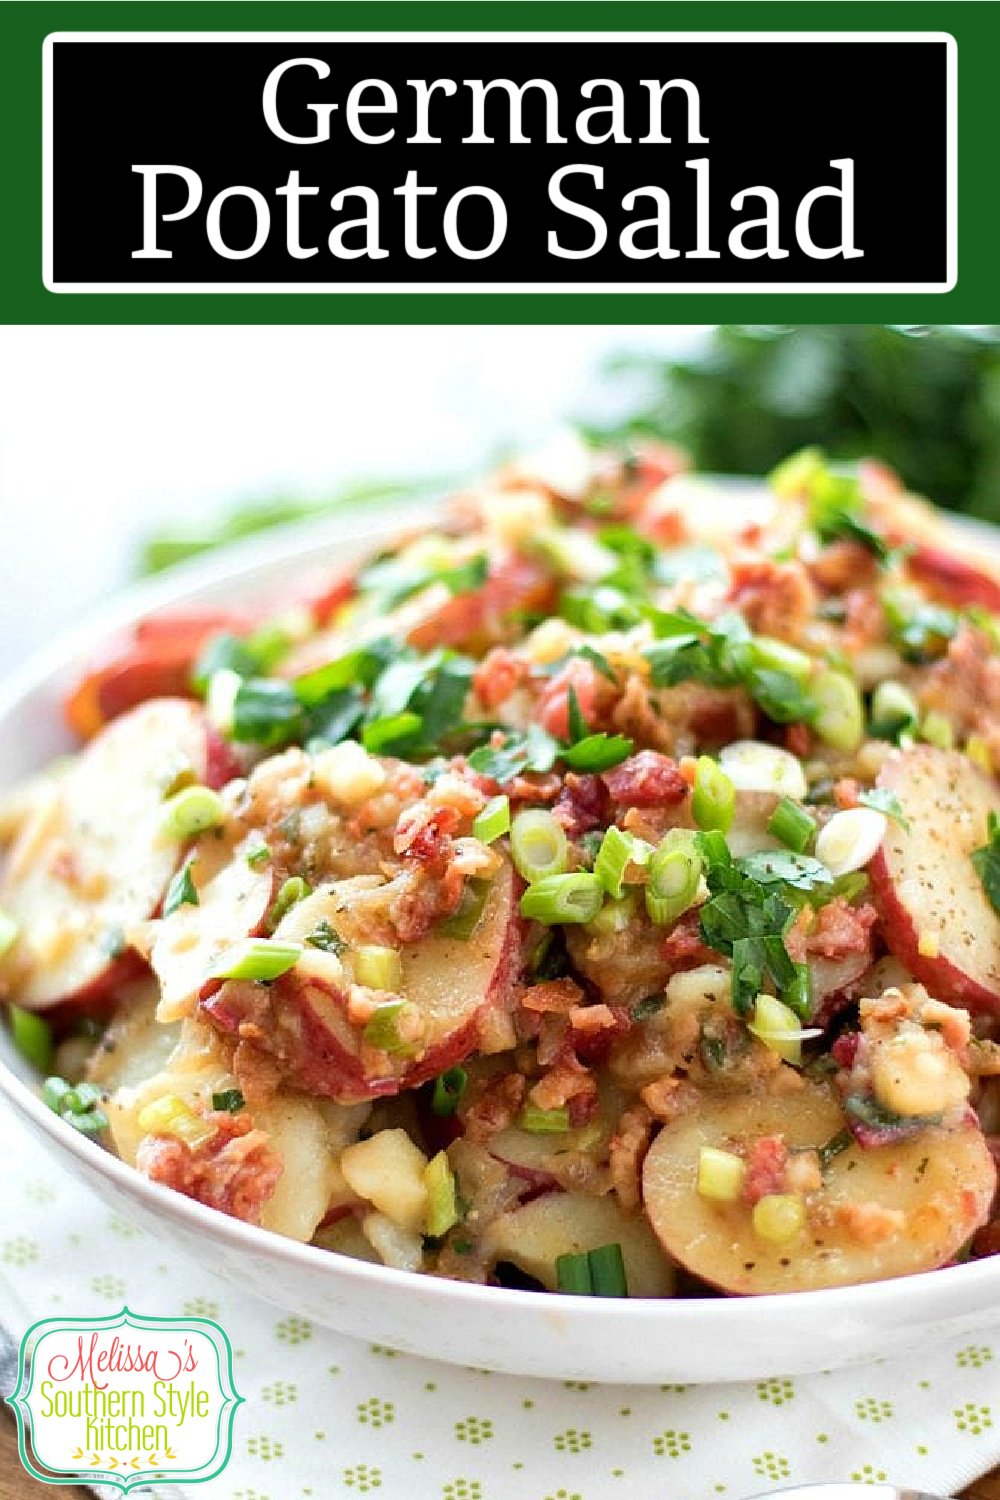 German Potato Salad is dressed with a tangy sweet vinaigrette and plenty of bacon #germanpotatosalad #potatosalad #potatosaladrecipes #salads #potatoes #sidedishrecipes #picnicfood #memorialday #july4threcipes #southernfood #southernrecipes